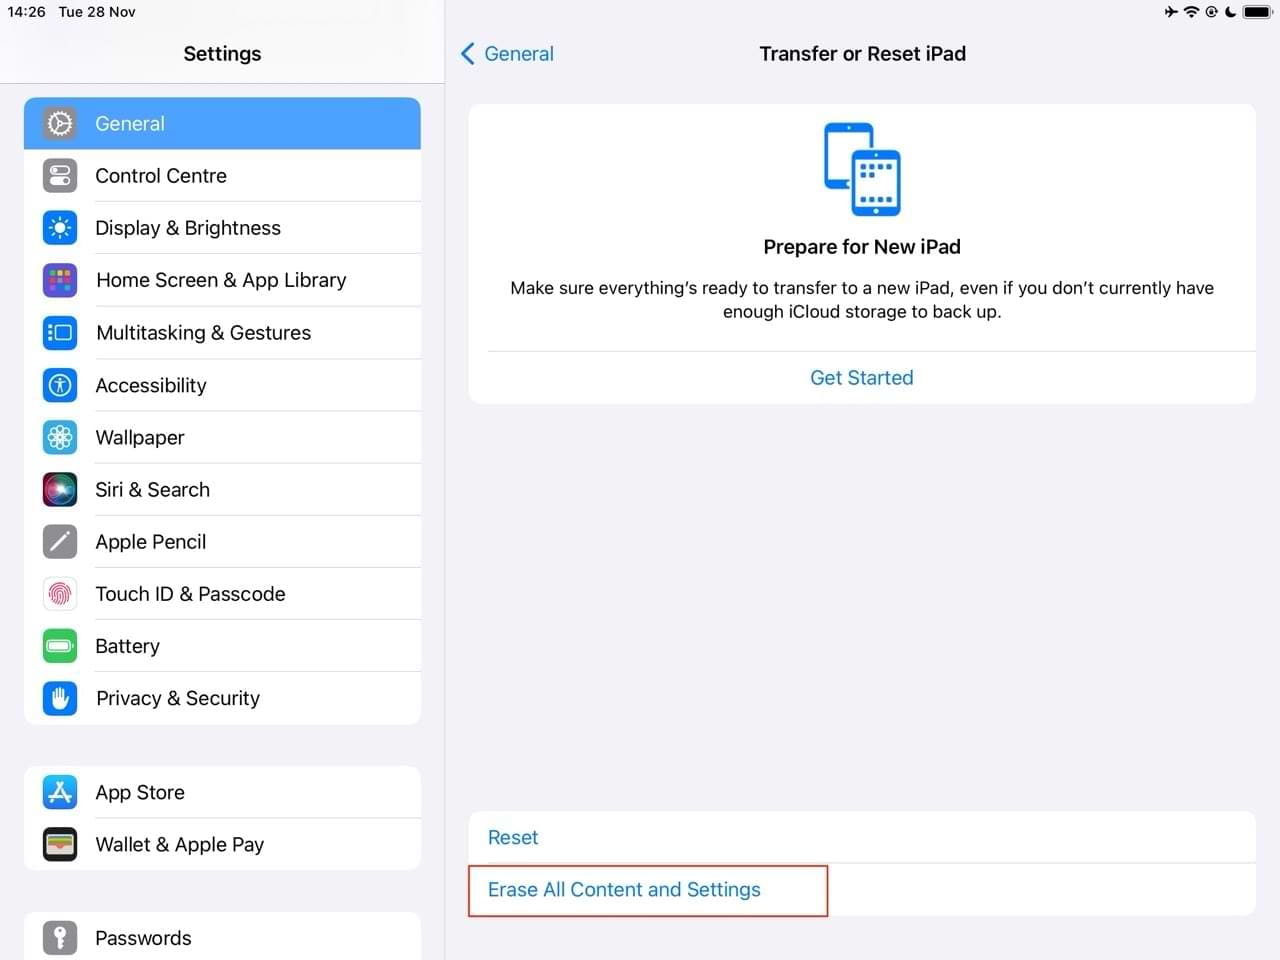 Erase the content and settings on your iPad